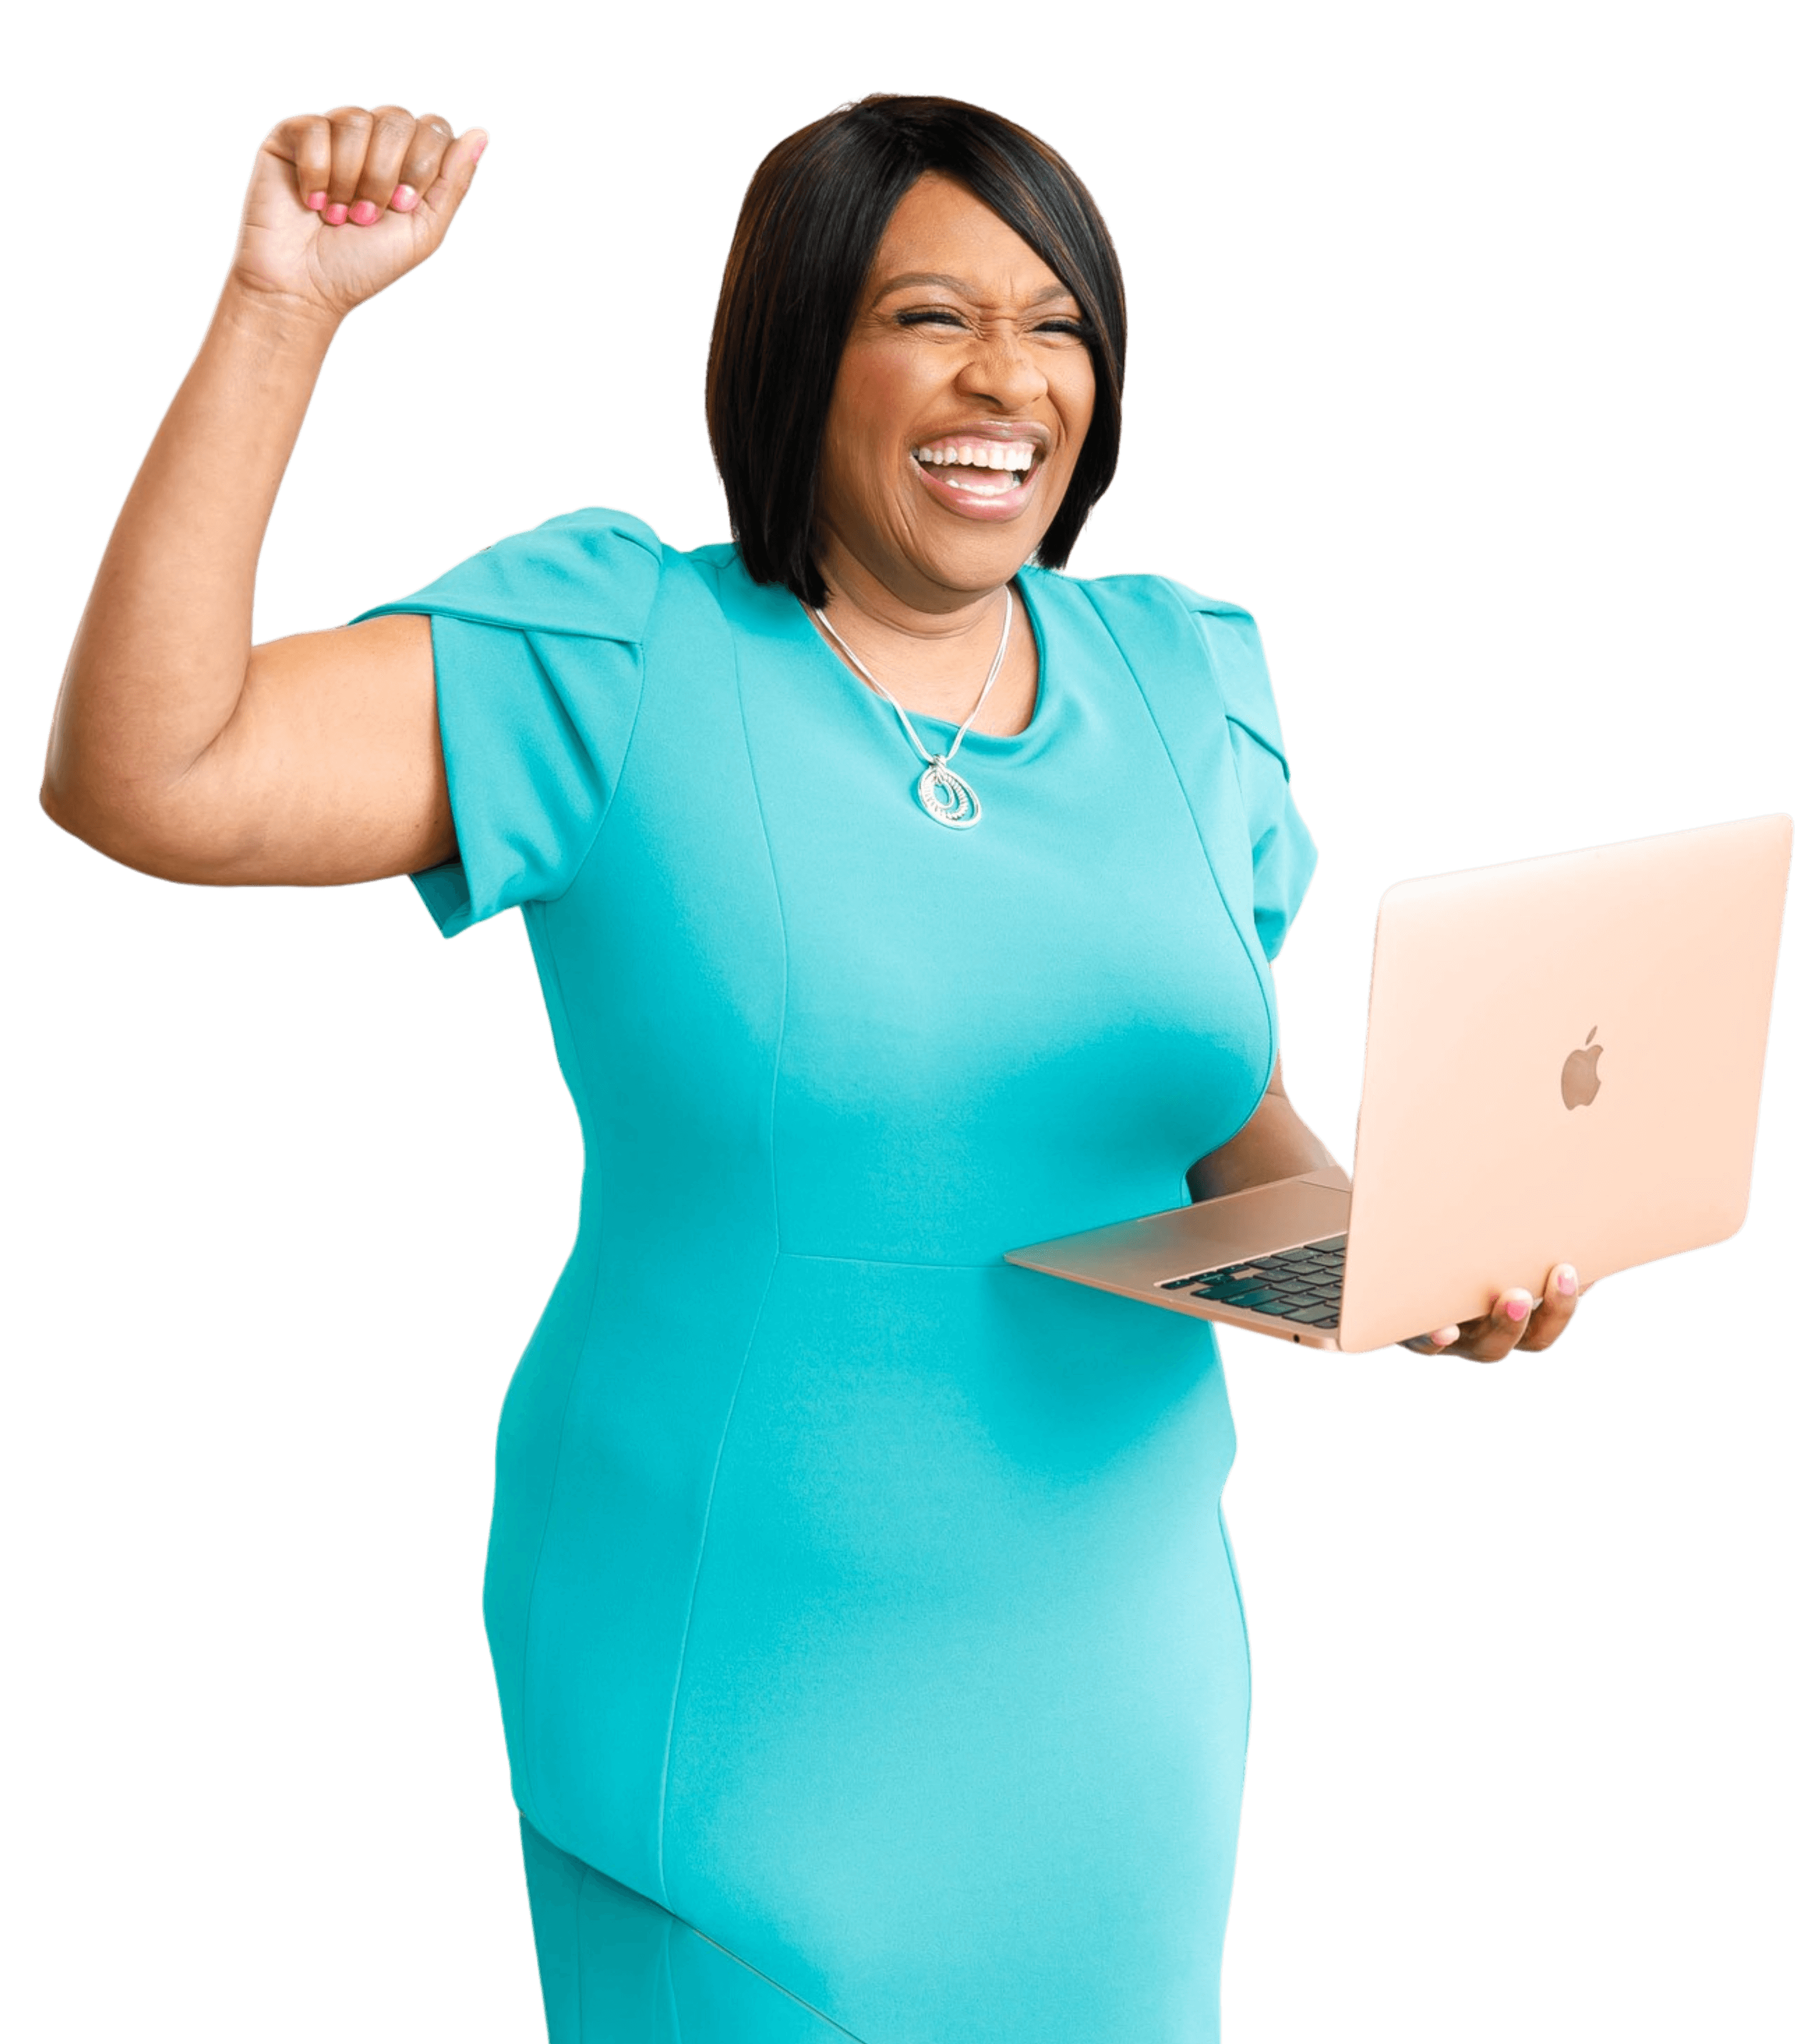 A woman holding her laptop and raising her fist.